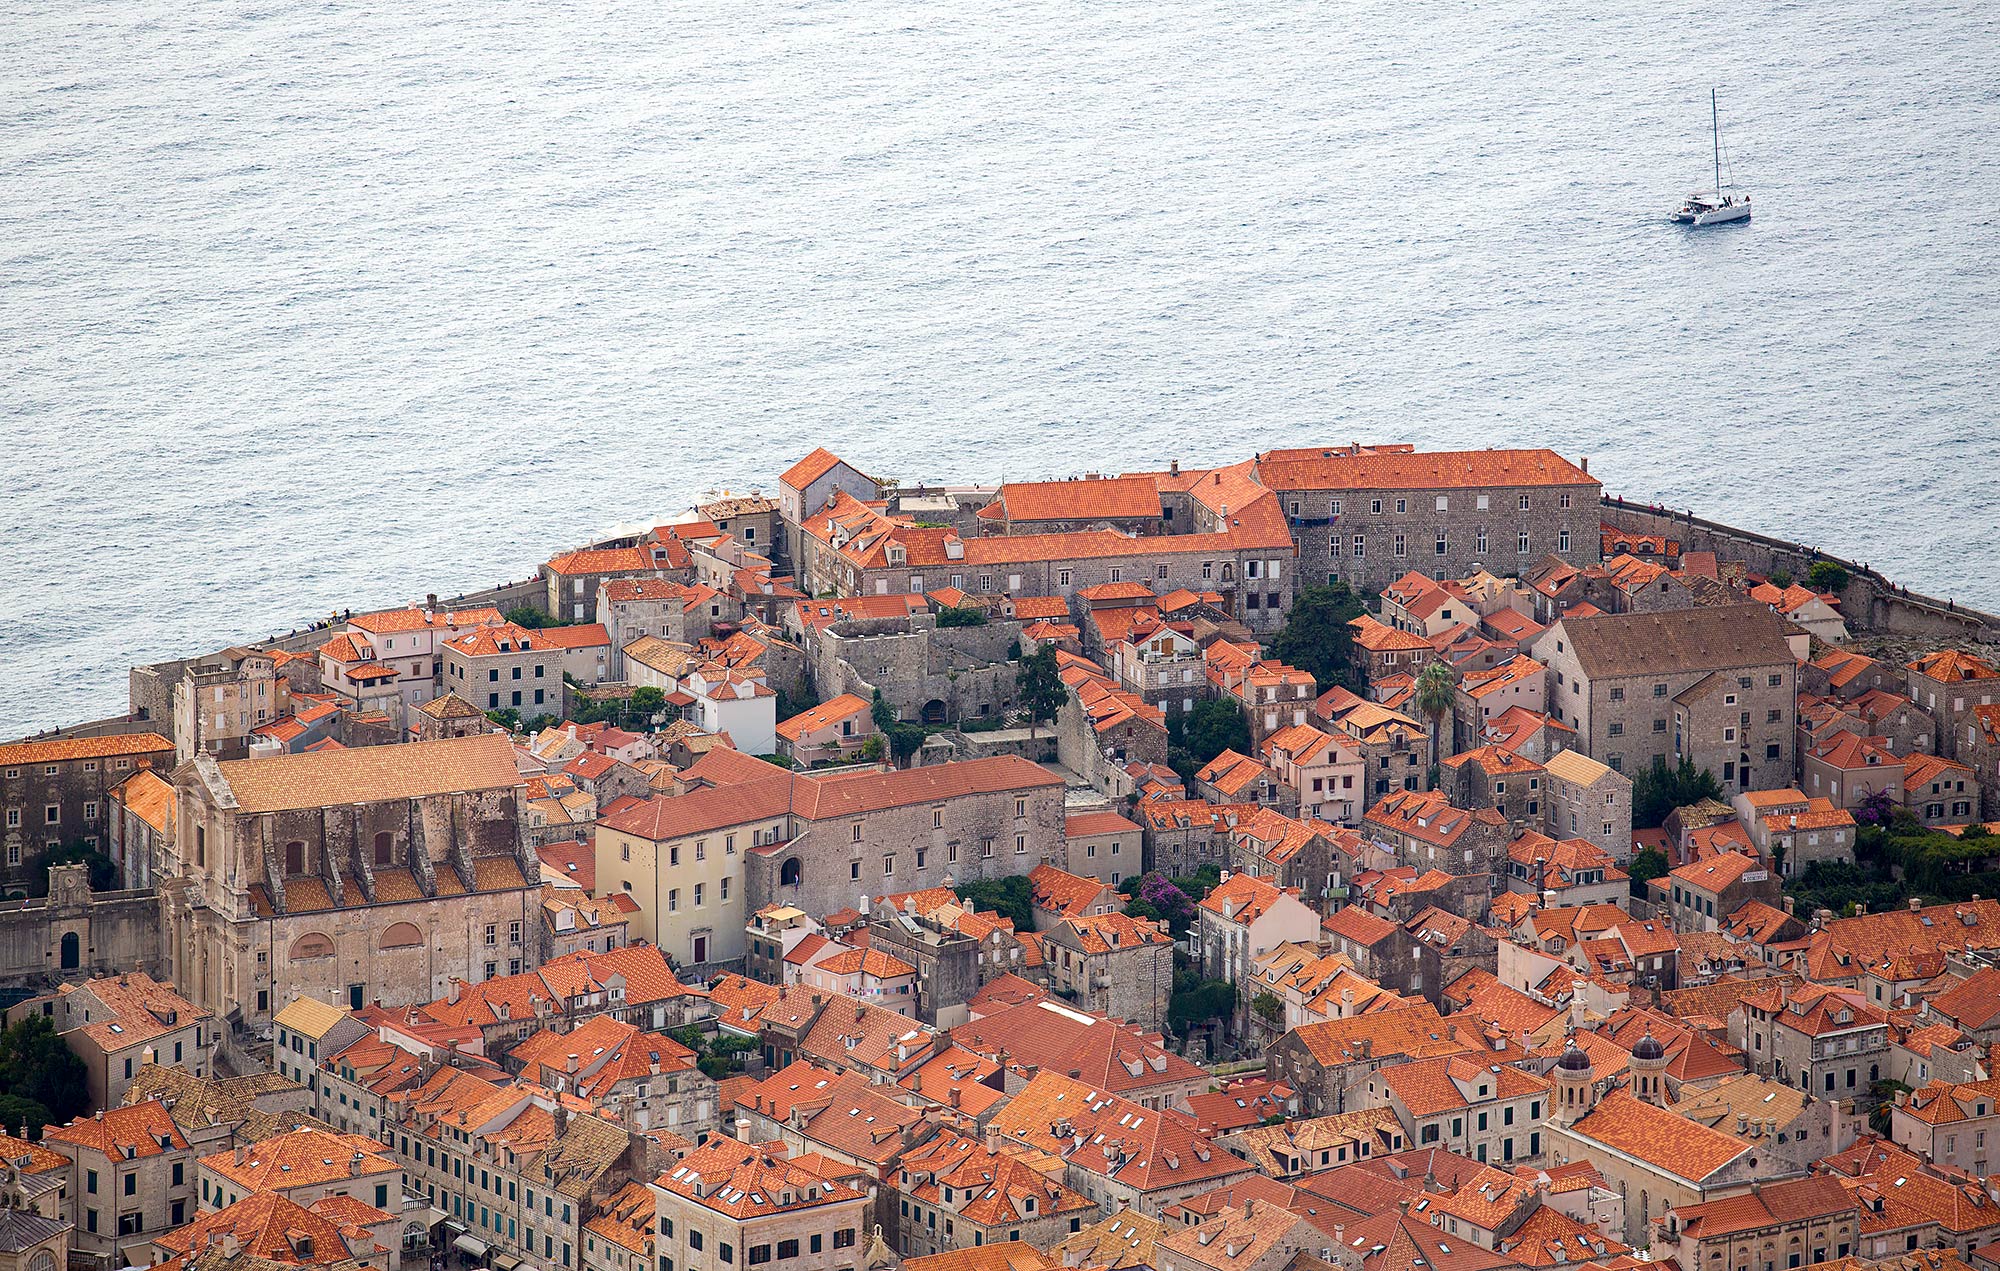 Dubrovnik from above, 200mm